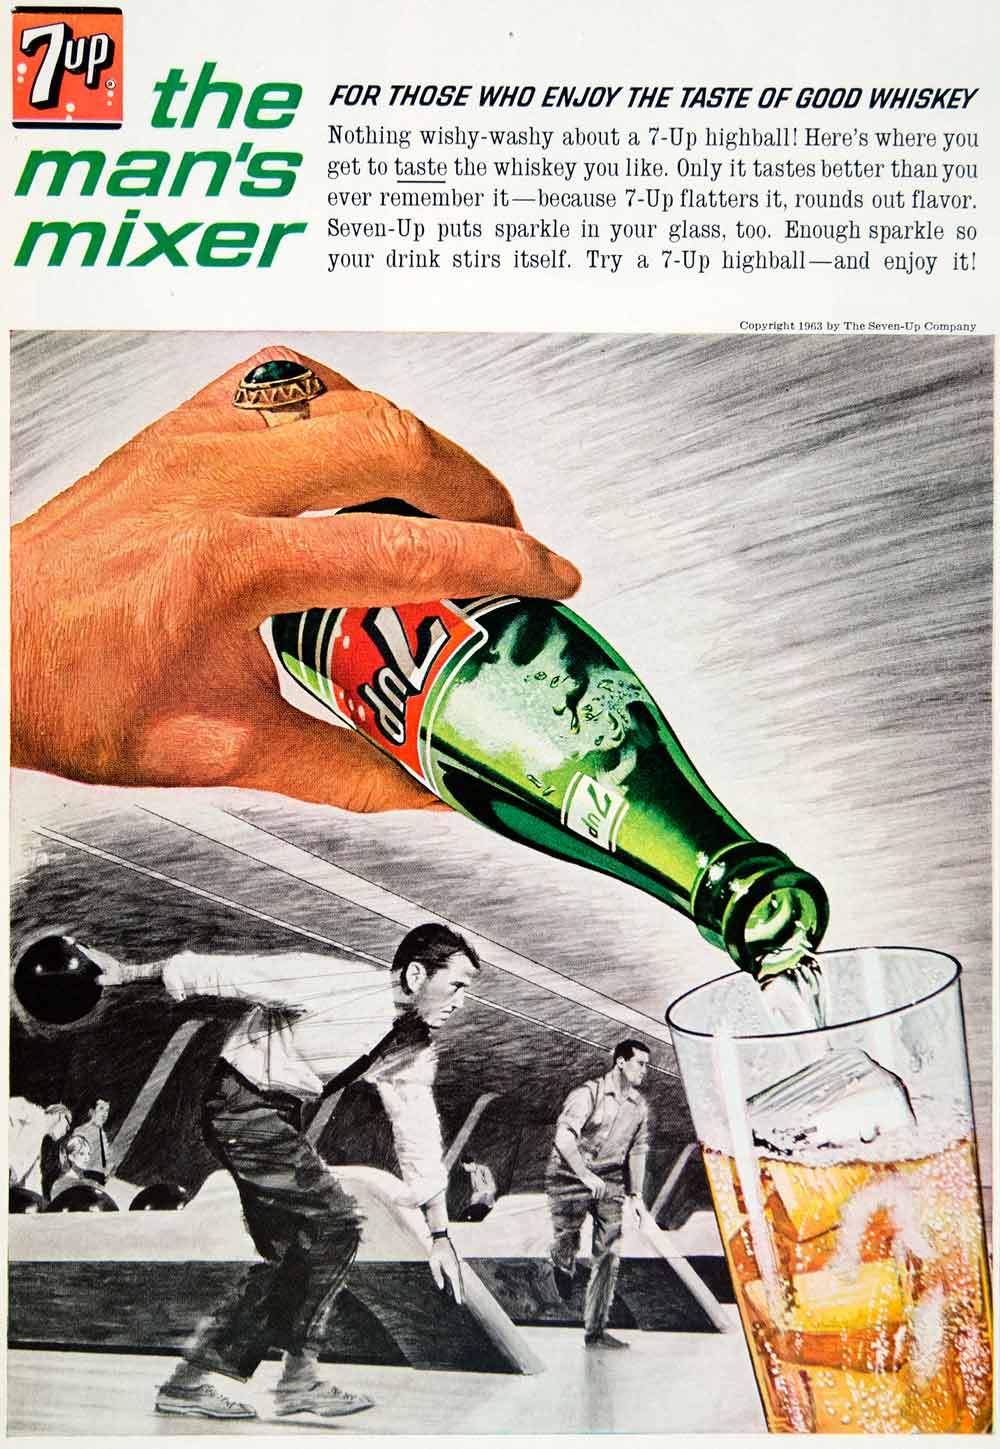 1963 Ad Vintage 7 UP Soda Pop Soft Drink Whiskey Highball Mixer Bowling YMM6